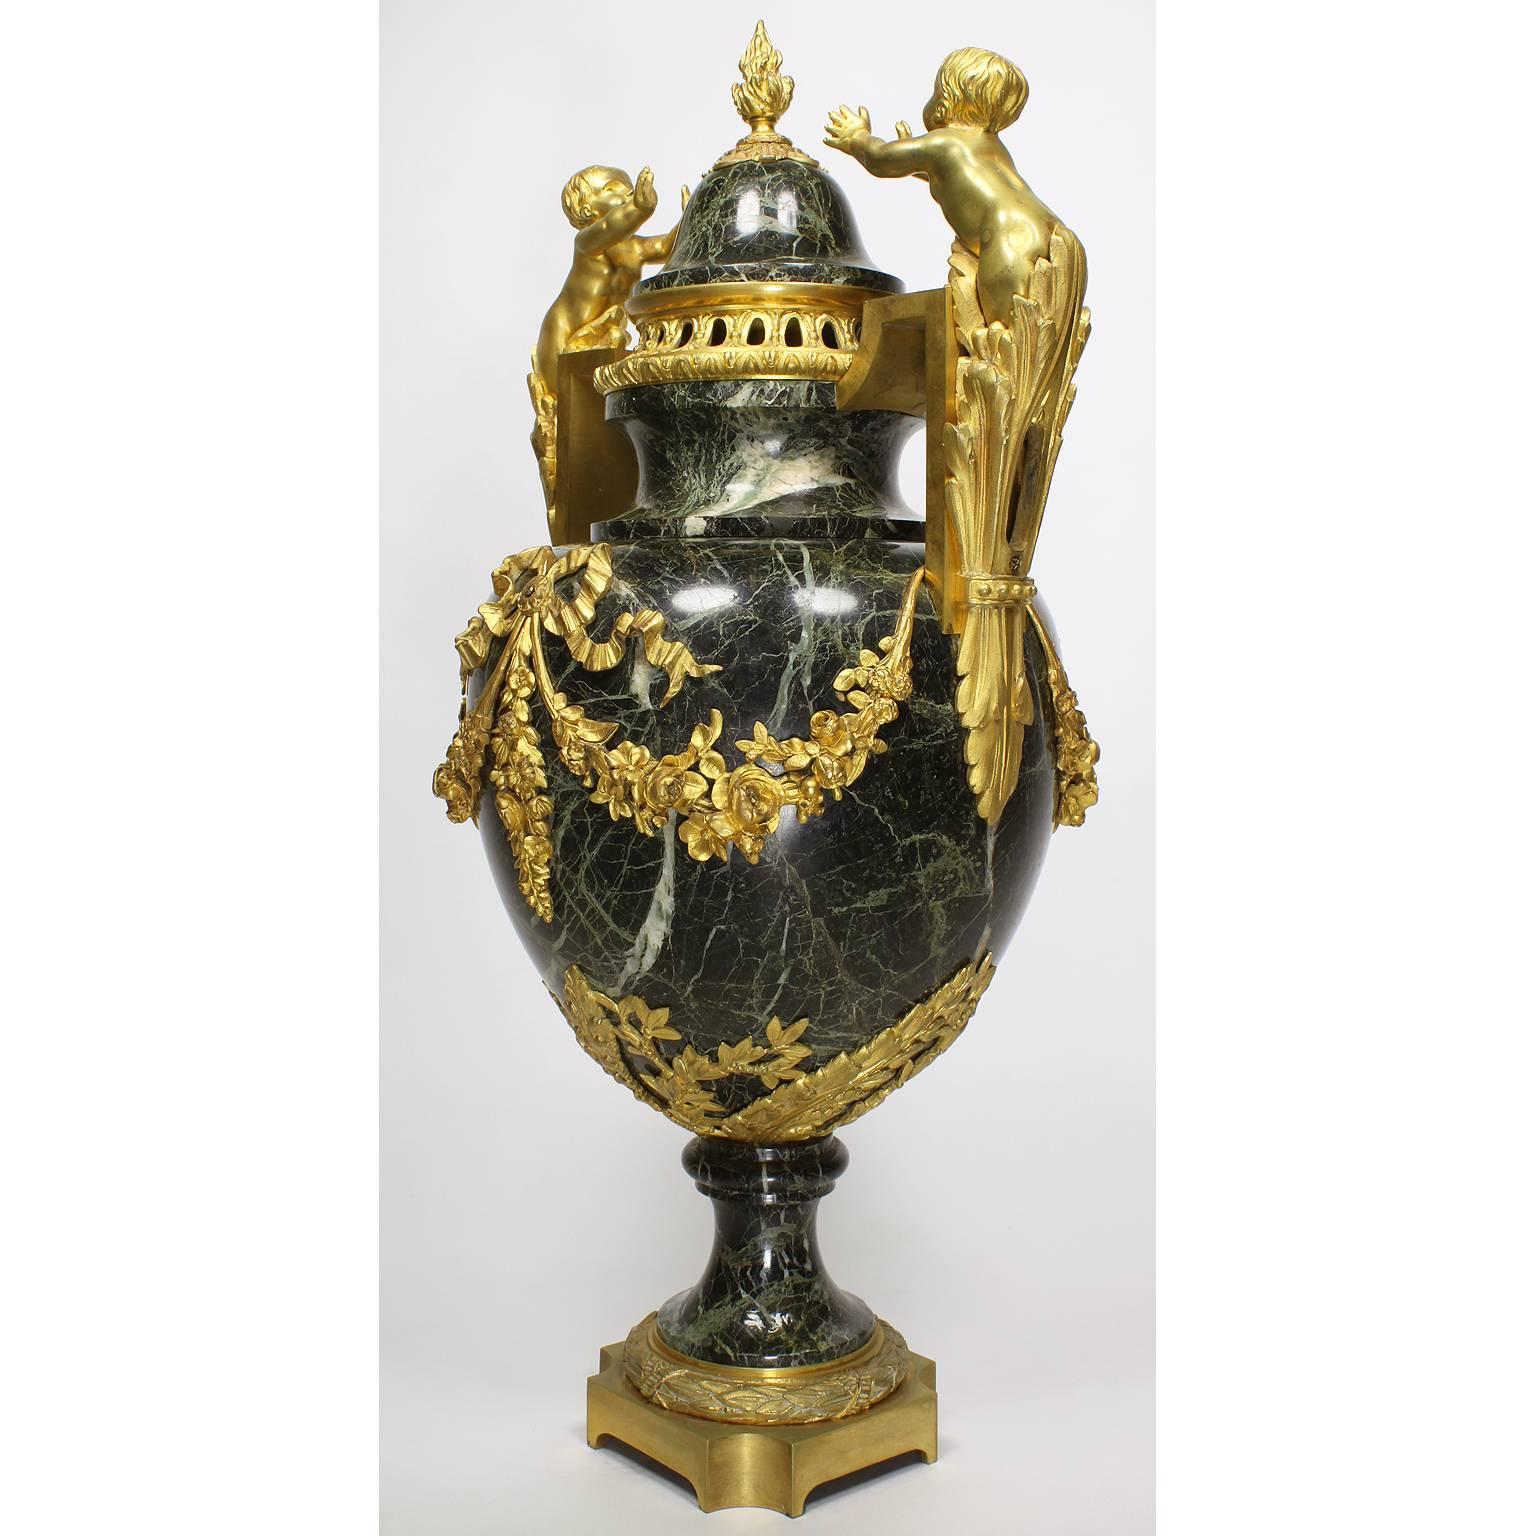 Gilt Pair of 19th-20th Century Louis XVI Style Ormolu and Marble Urns with Children